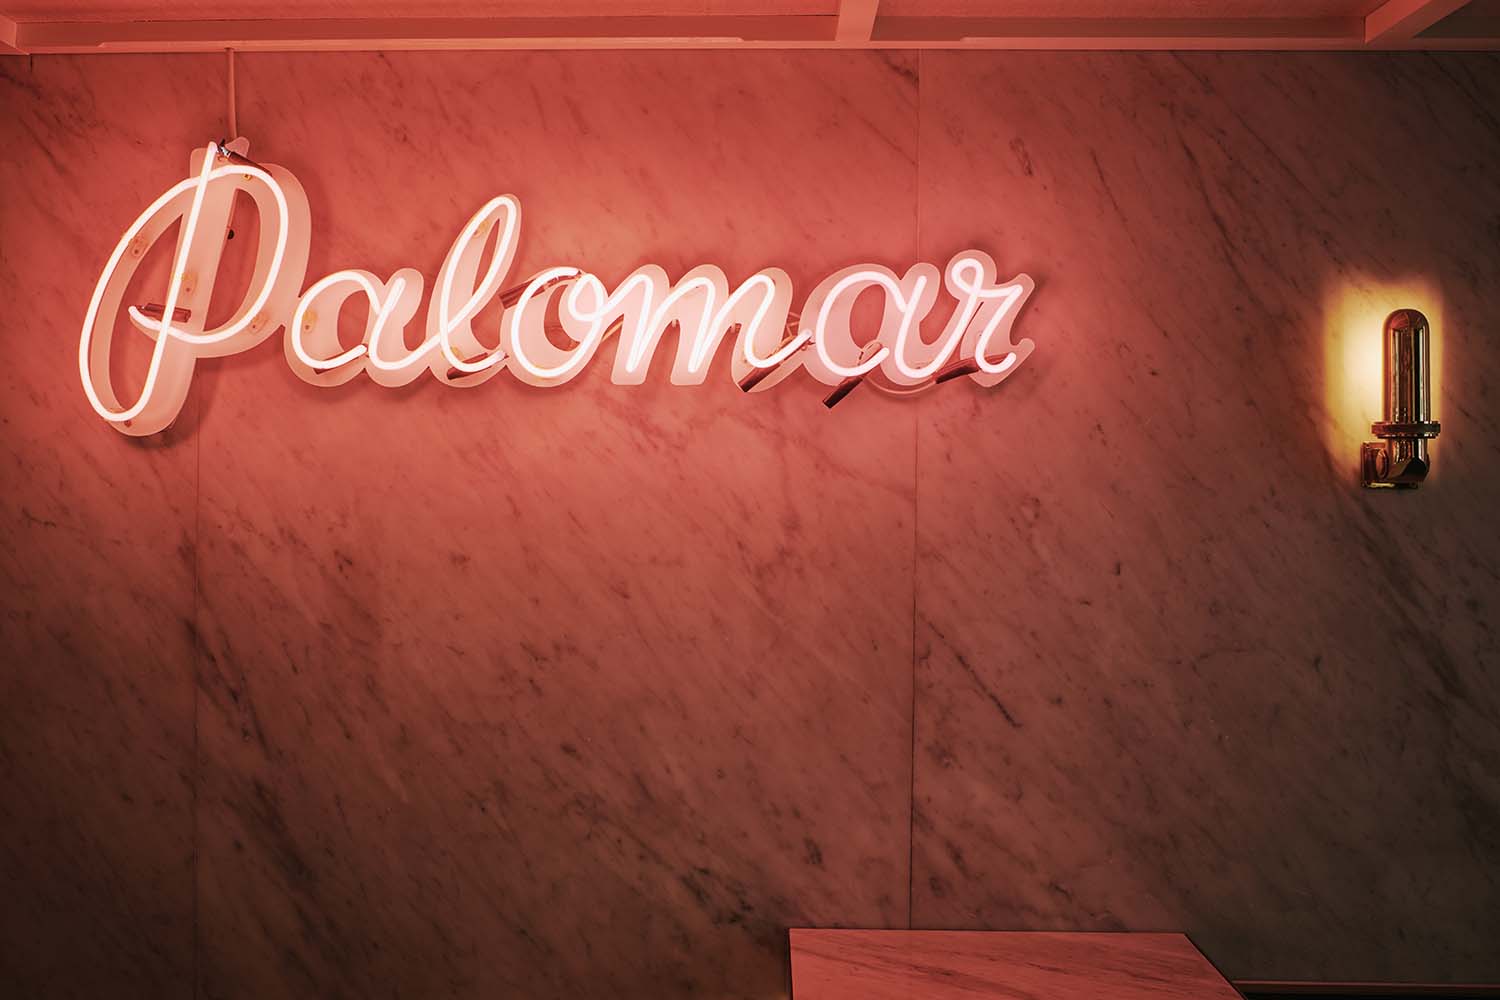 The Palomar Soho London Restaurant Redesigned by Archer Humphryes